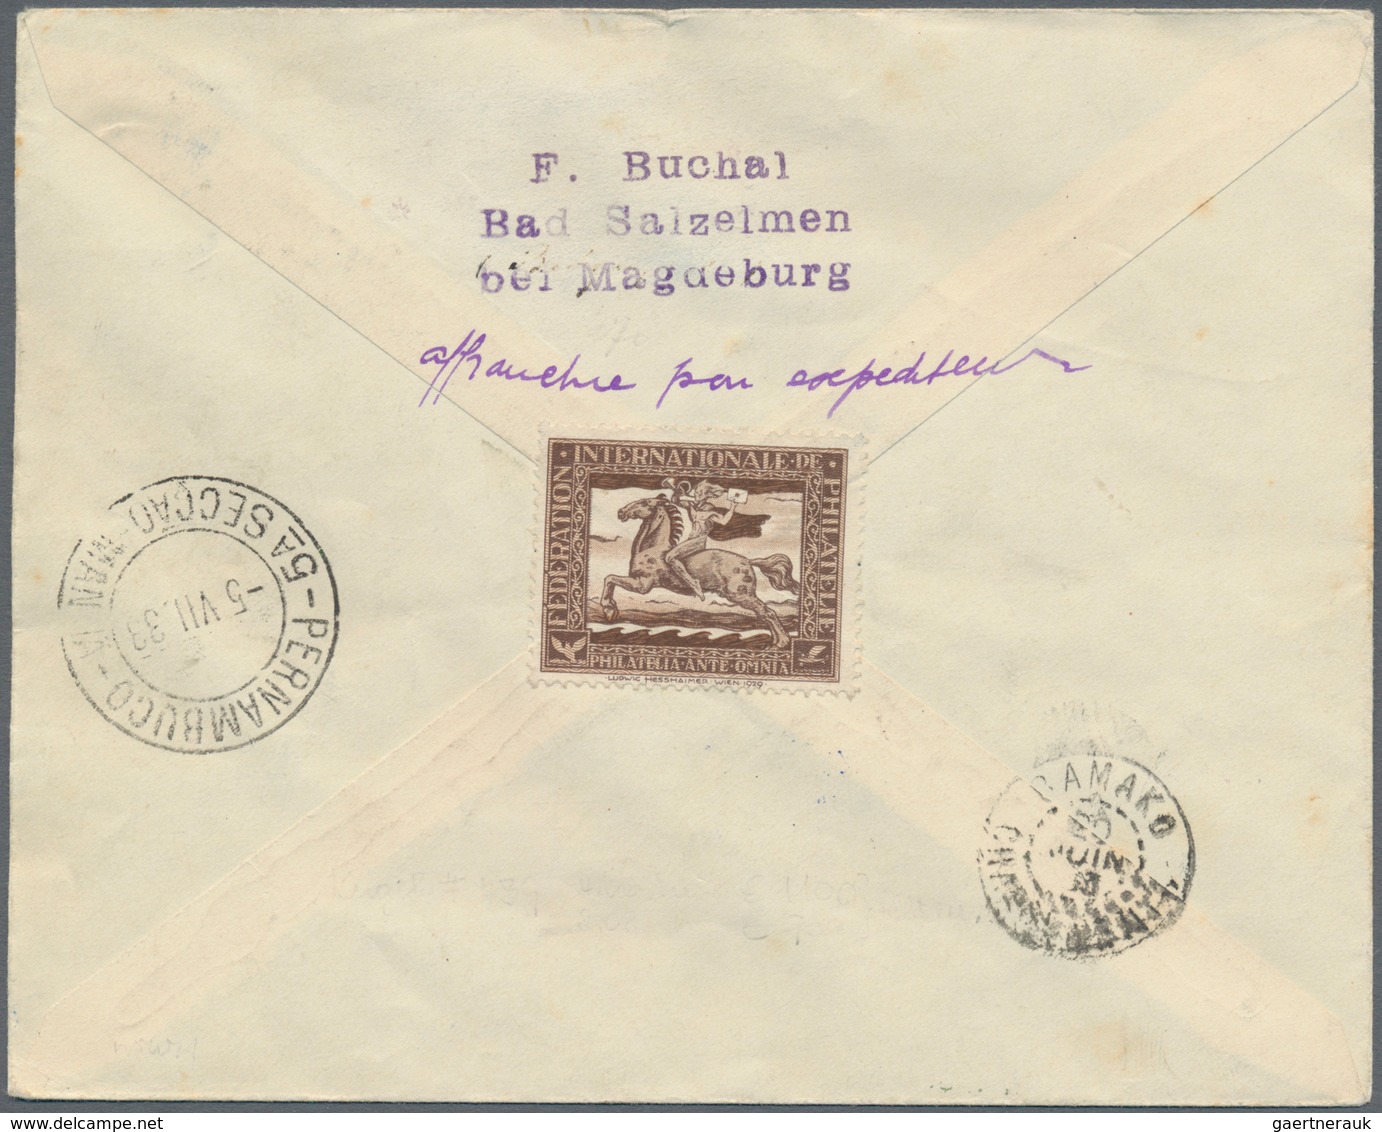 00645 Zeppelinpost Übersee: 1933, French Sudan, Tombouctou, Treaty State Highlight, Registered Cover Via F - Zeppelin